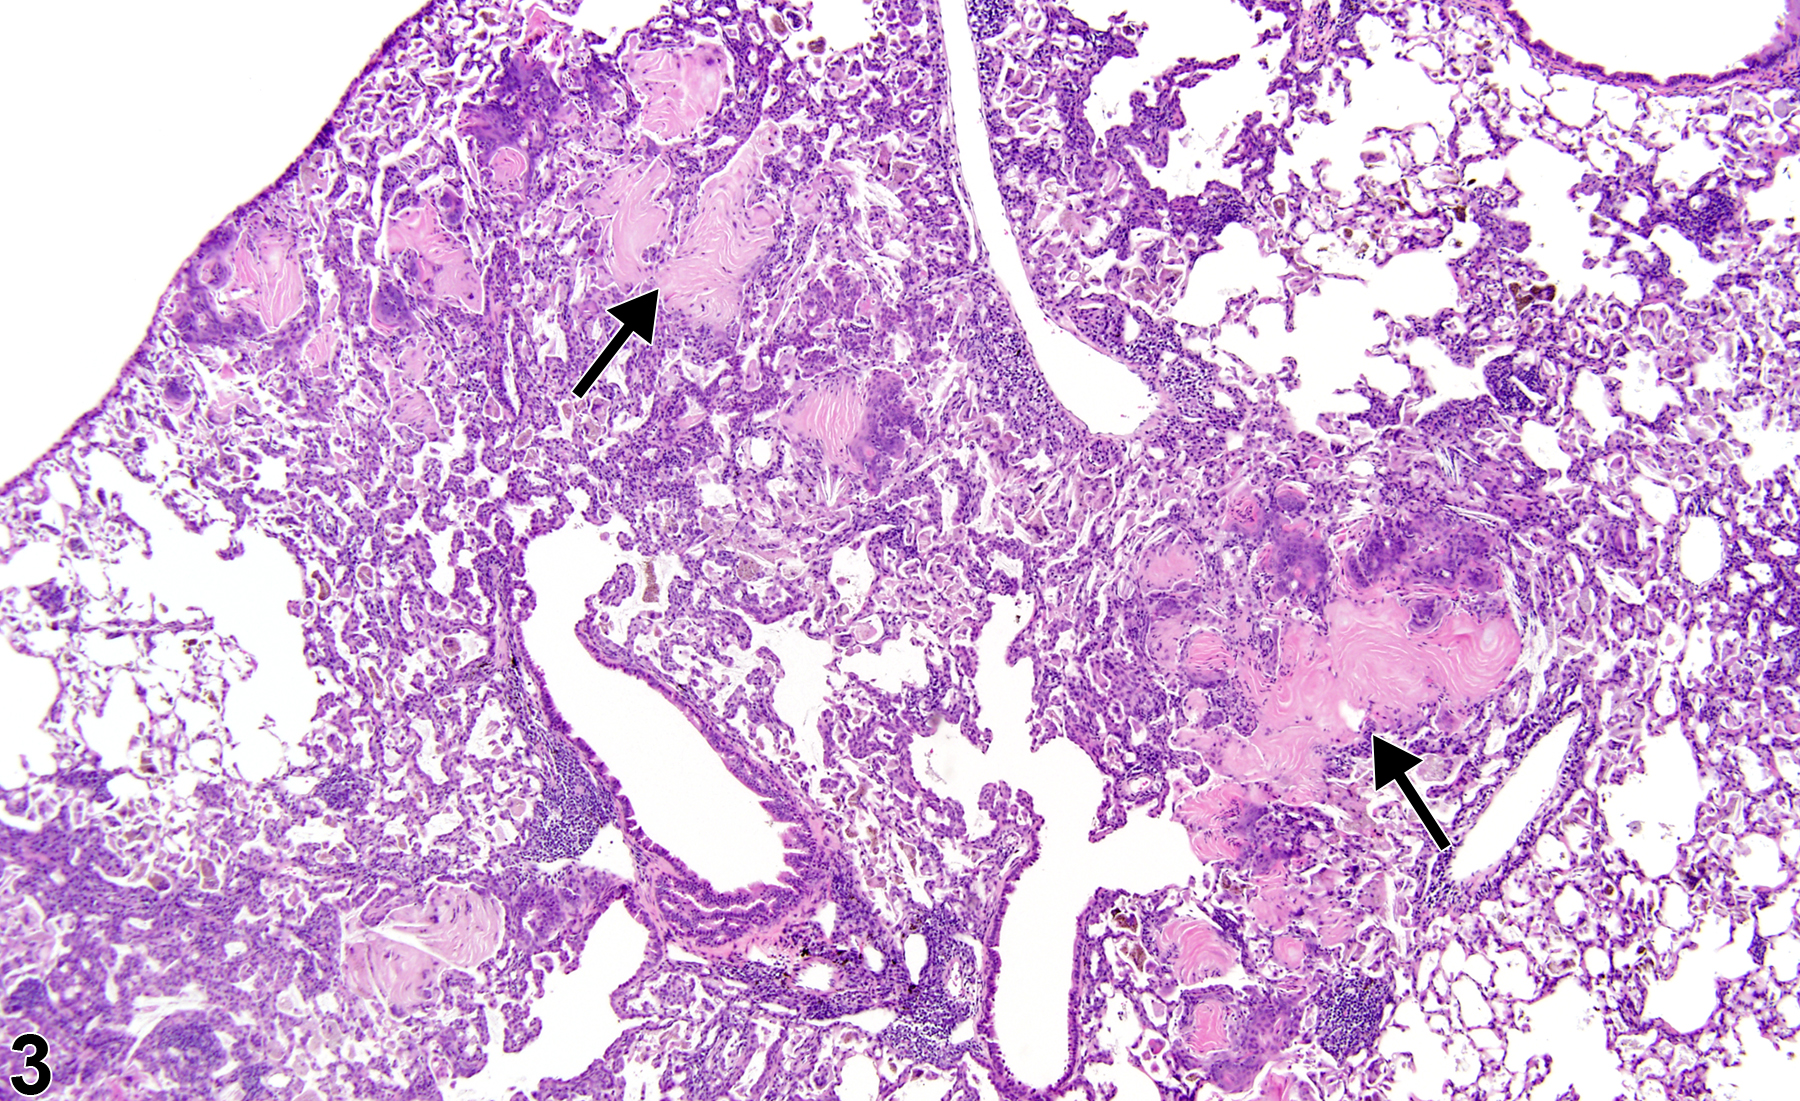 Image of alveolar squamous metaplasia in the lung from a female Harlan Sprague-Dawley rat in a chronic study